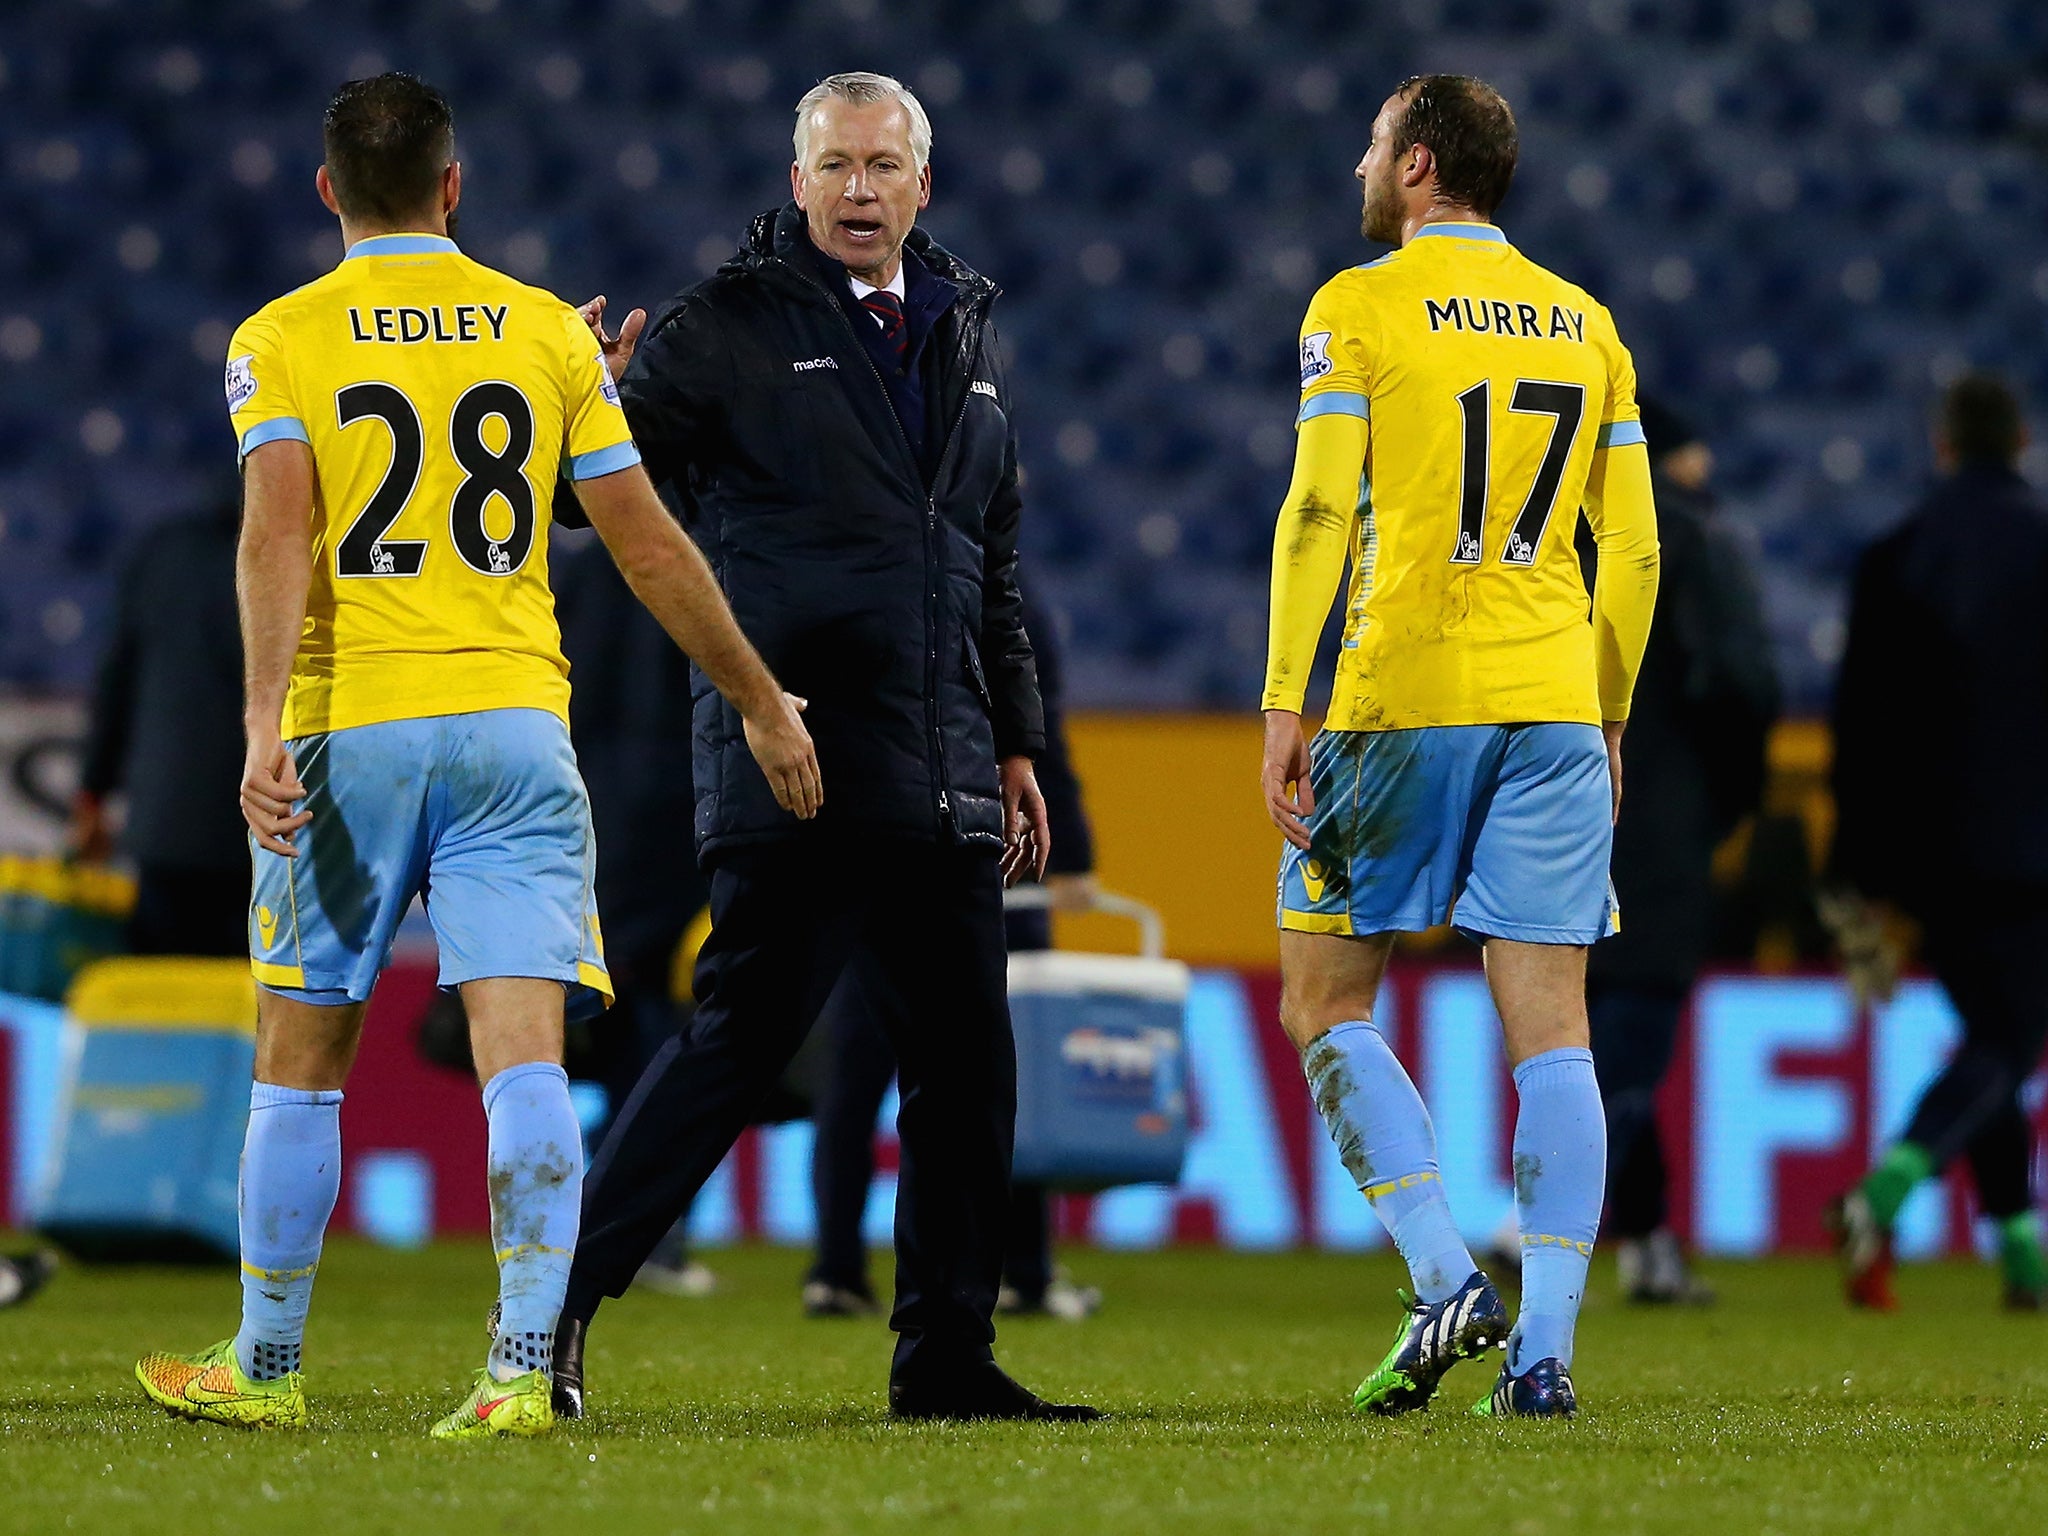 Pardew oversaw a run of eight league wins in 12 matches